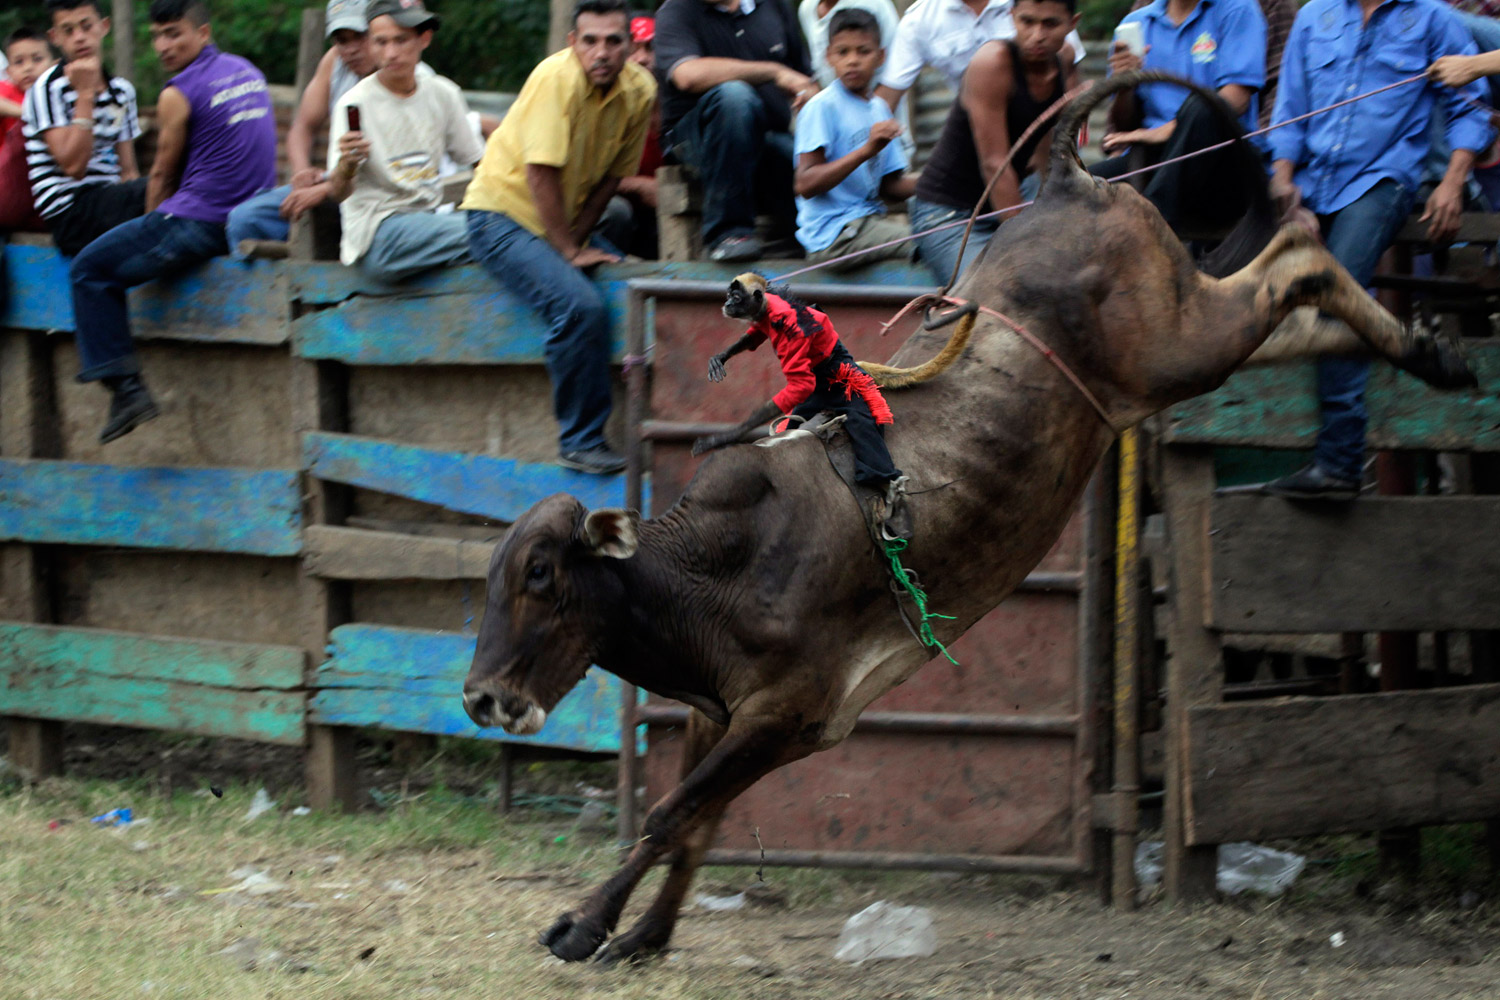 A monkey rides on the back of a bull during a bullfighting event at the festival of El Senor de Esquipulas at Tipitapa, some 16 miles (26 km) north of Managua, on Jan. 16, 2011.